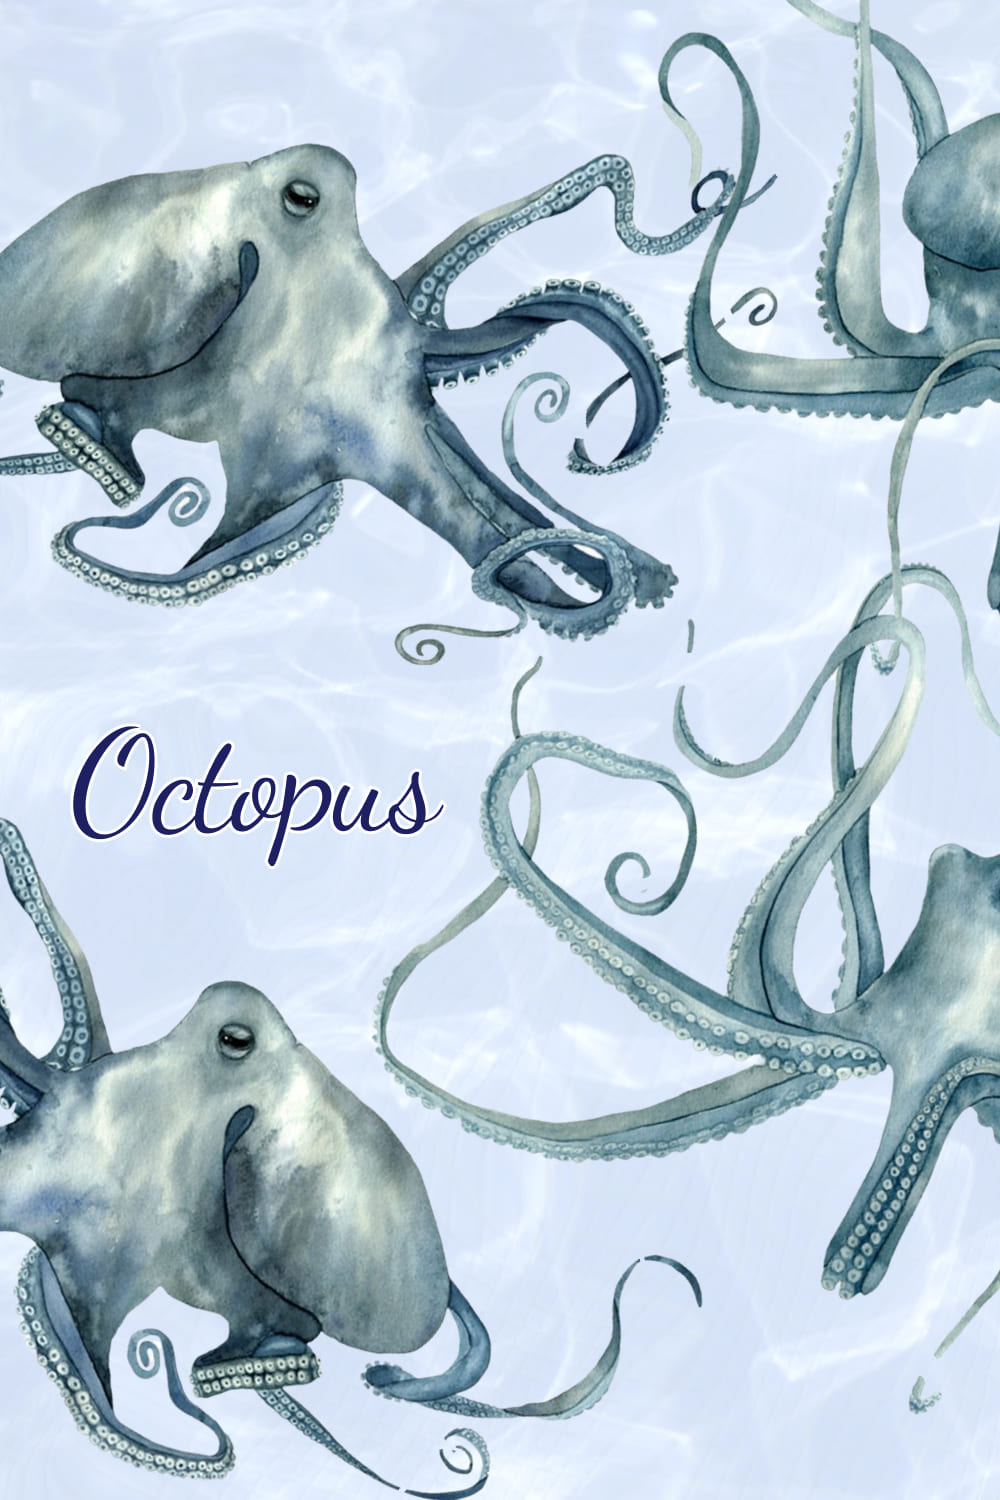 So filled watercolor octopus.